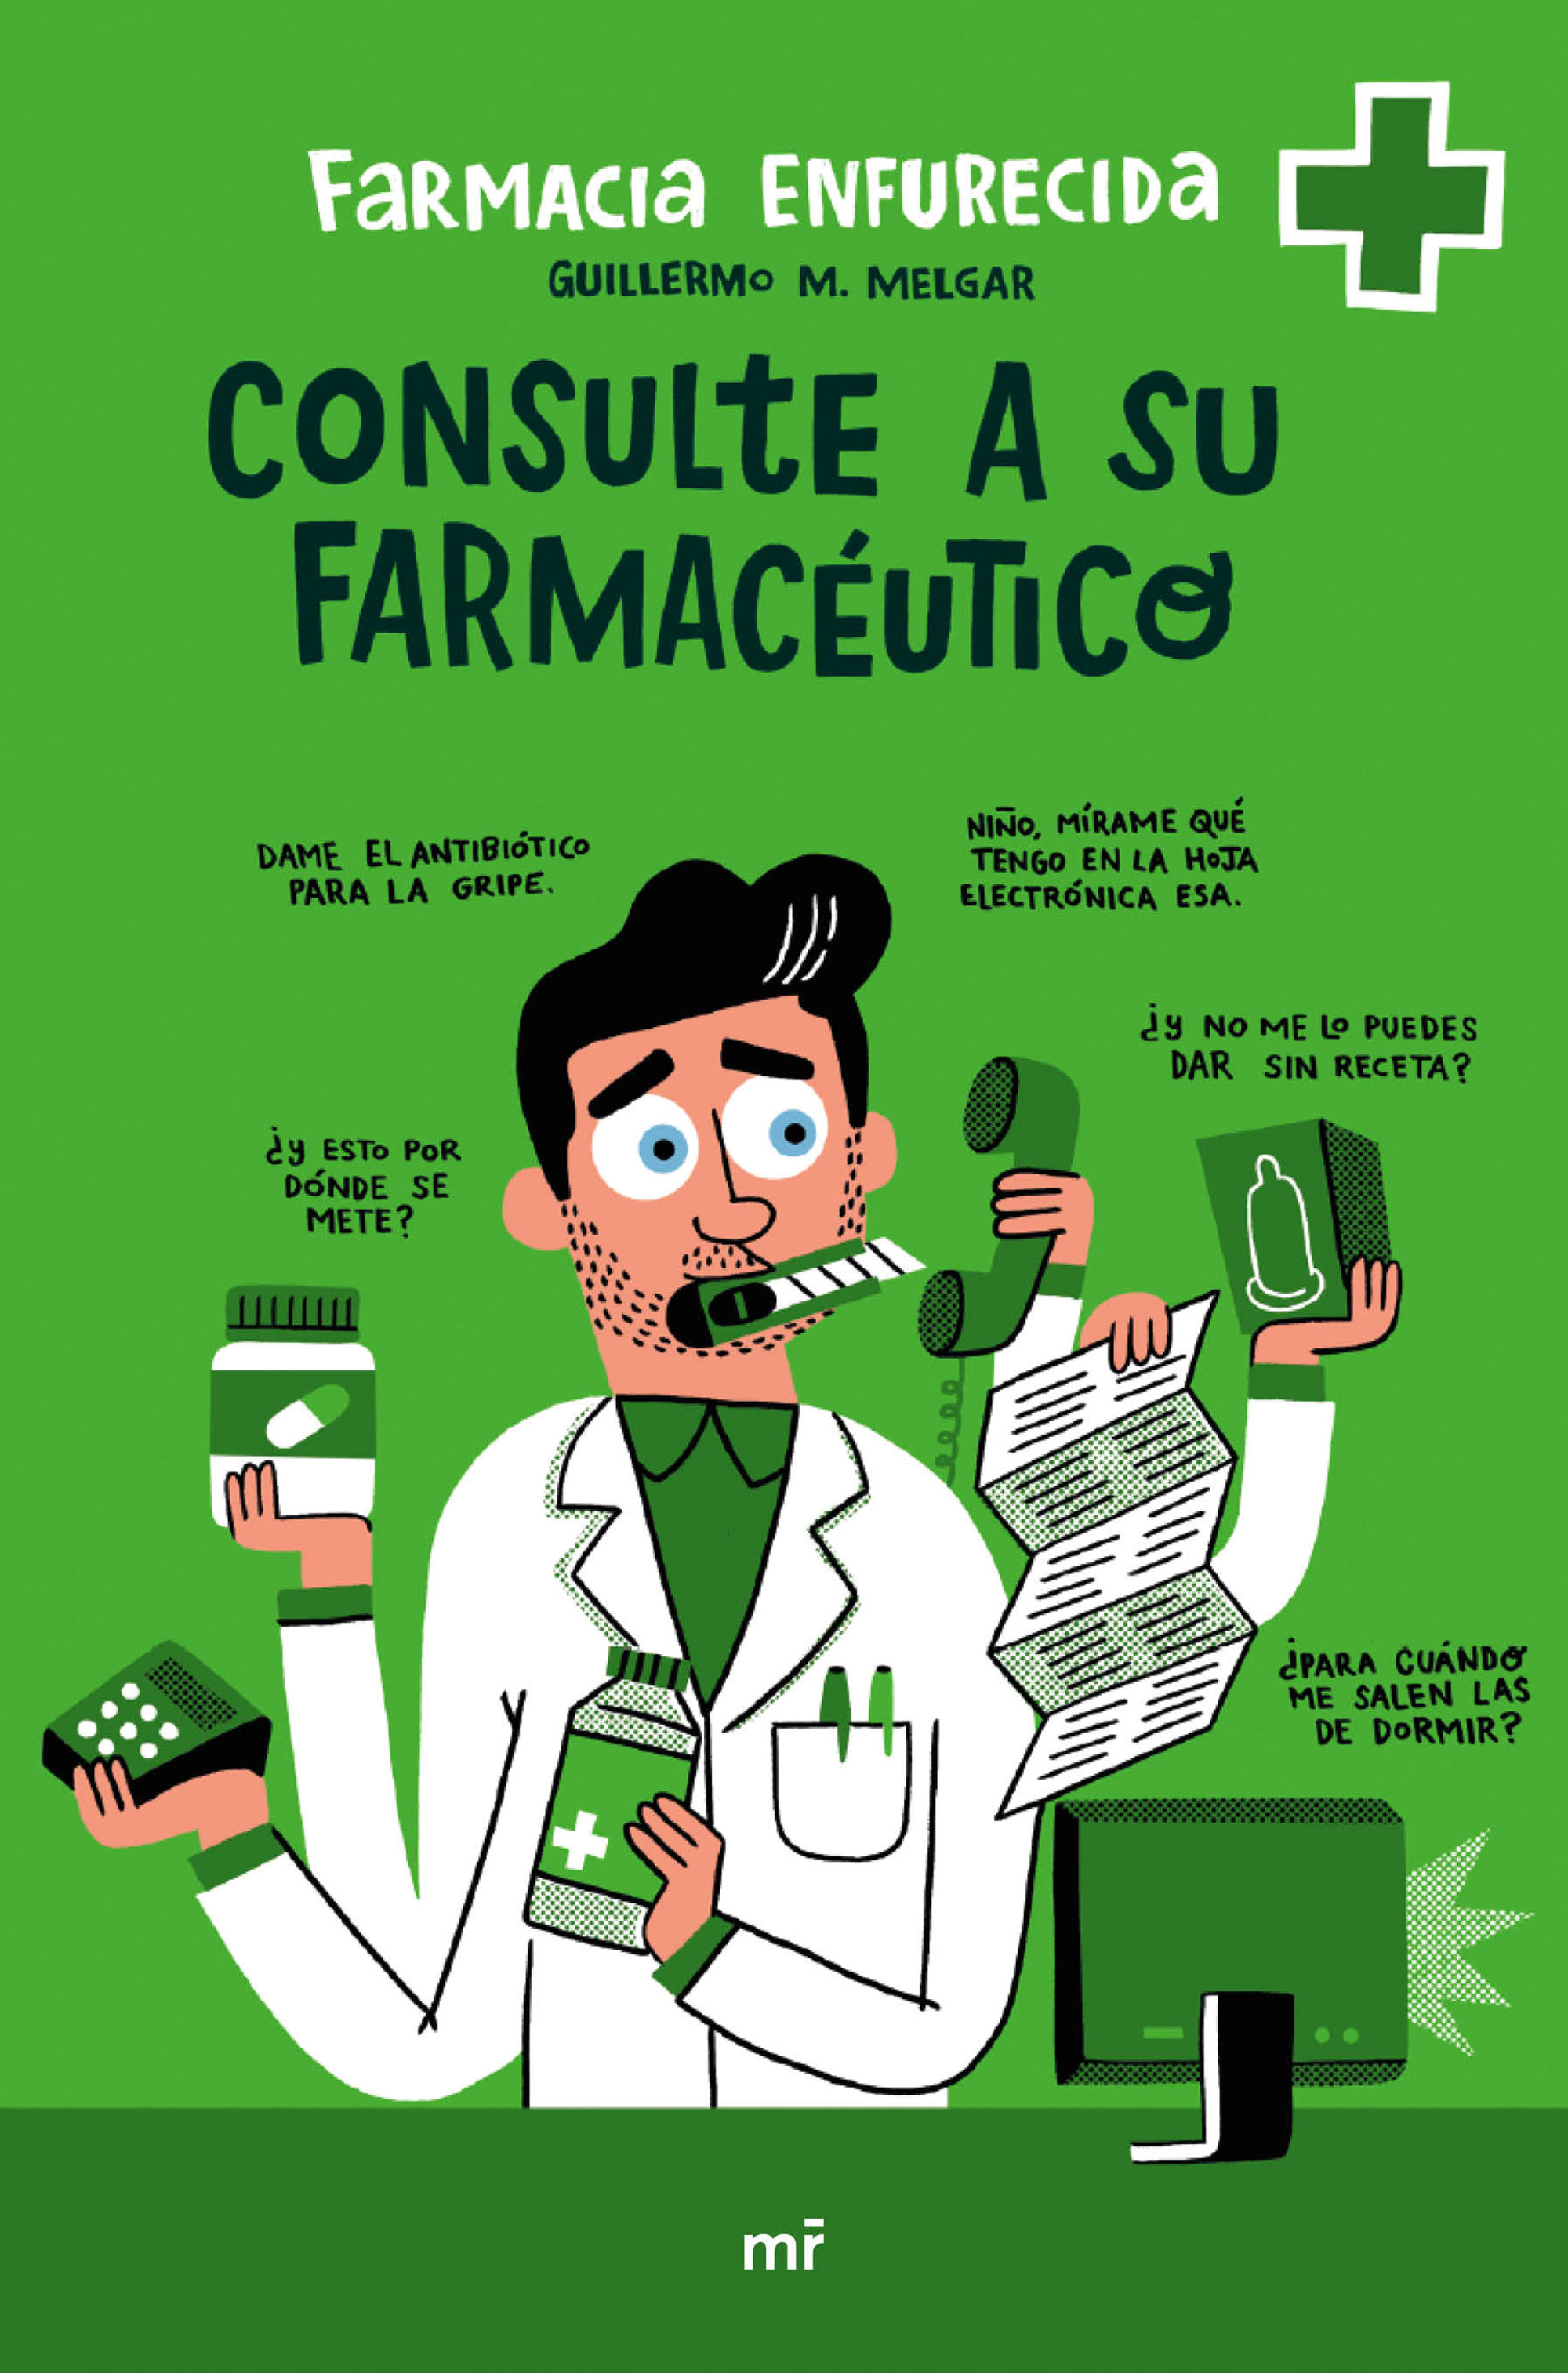 Cover of the book 'Consult your pharmacist'.